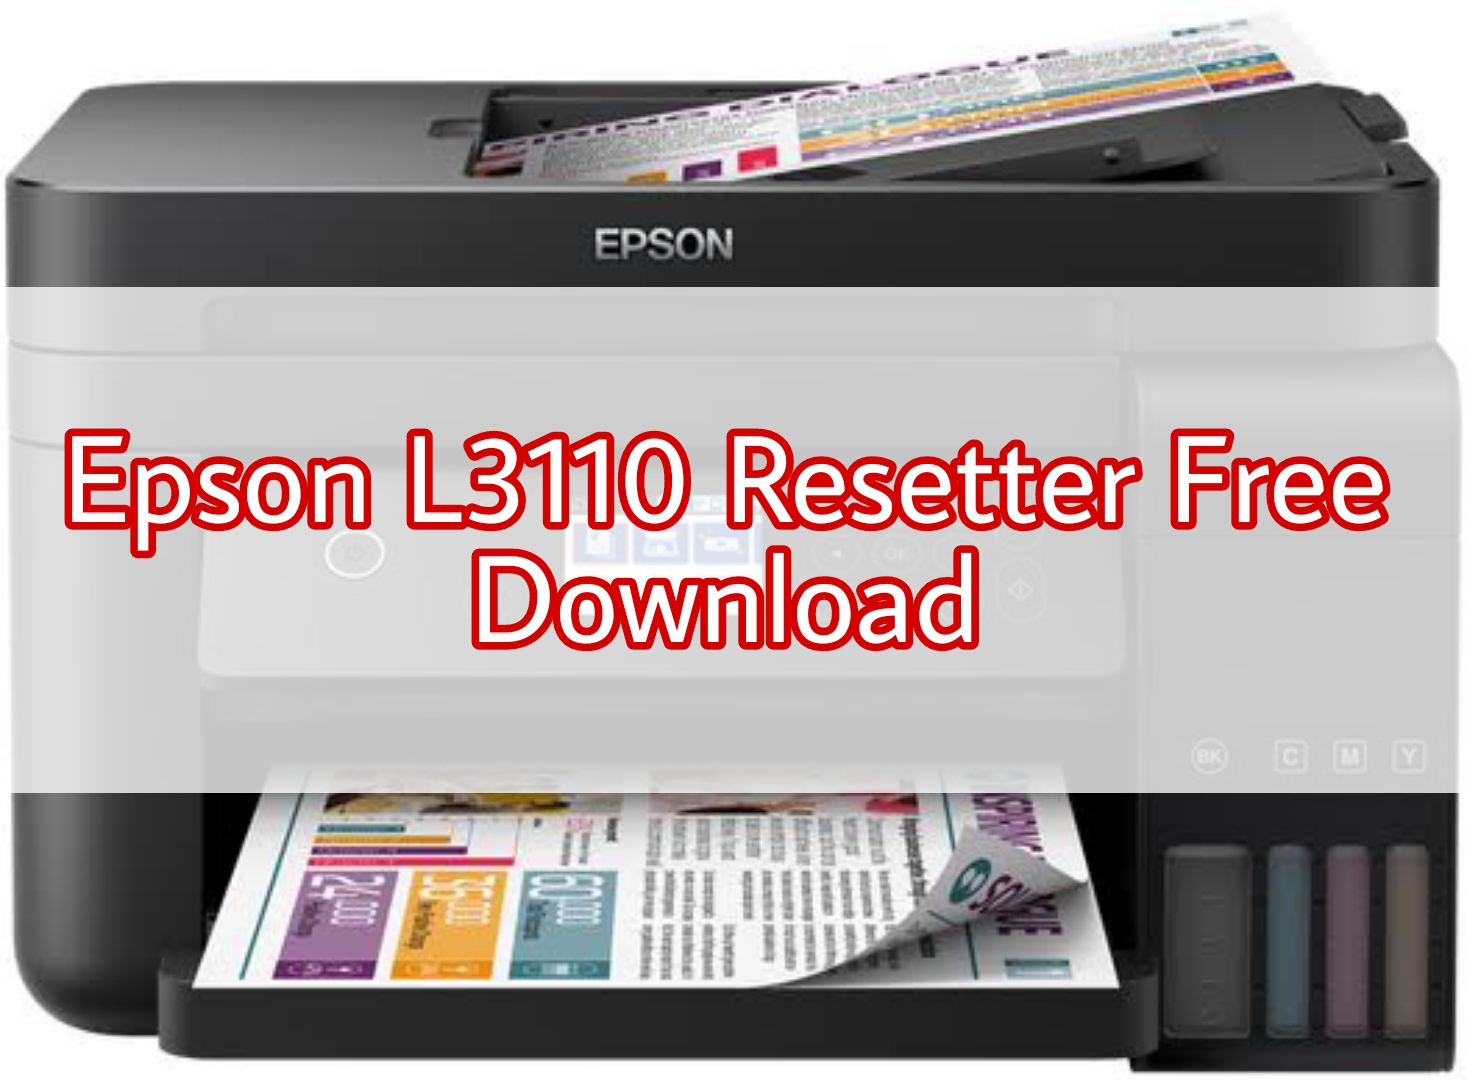 Epson L3110 Resetter Free Download Zip File